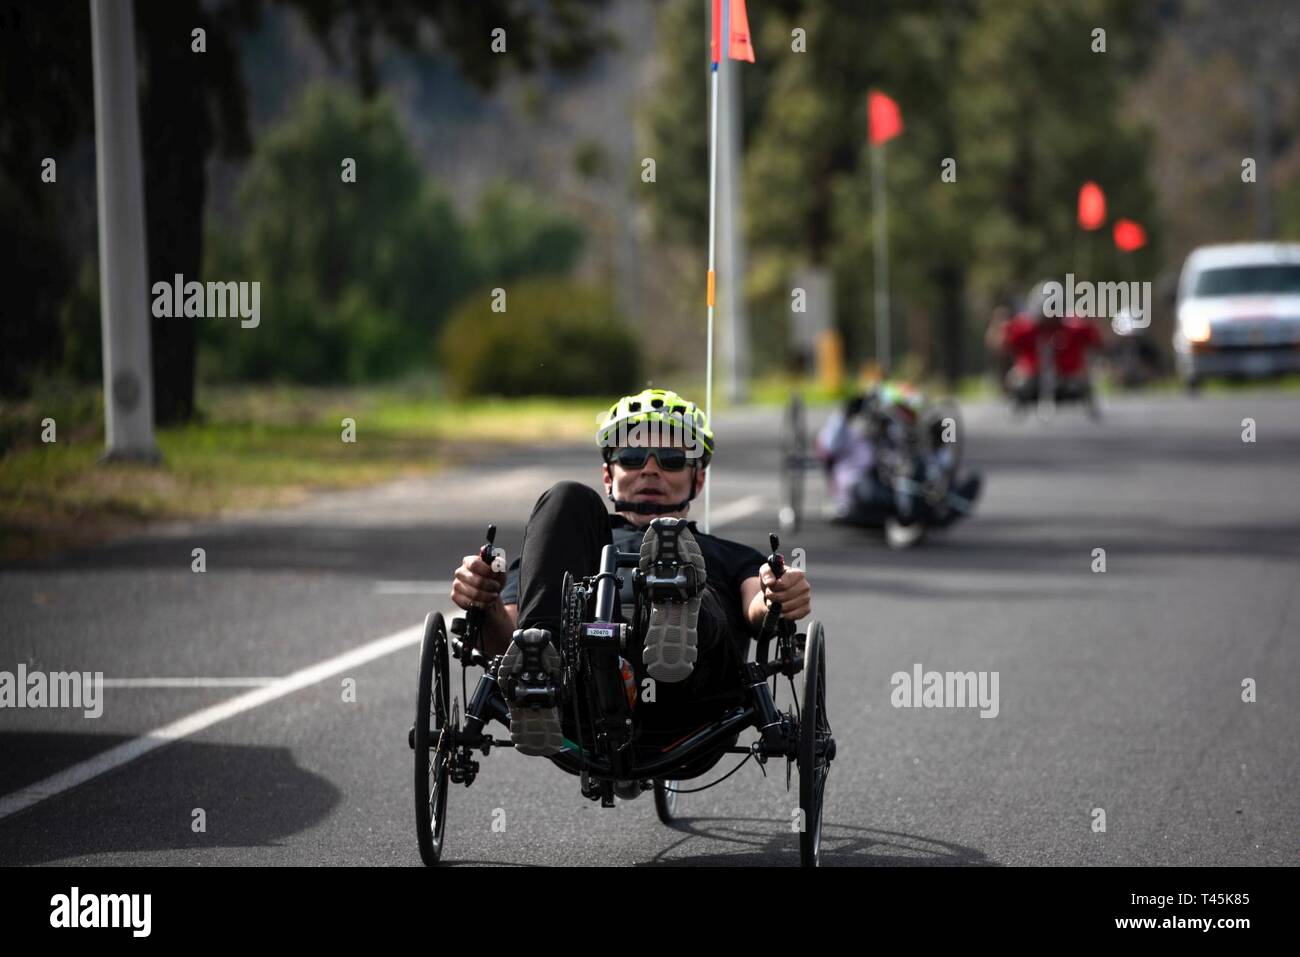 An athlete leads the way during practice for hand cycling at the 9th annual Marine Corps Trials at Marine Corps Base Camp Pendleton, California, March 1, 2019. The Marine Corps Trials promotes recovery and rehabilitation through adaptive sports participation and develops camaraderie among recovering service members and veterans. Additionally, the competition is an opportunity for participants to demonstrate physical and mental achievements and serves as the primary venue to select Marine Corps participants for the DoD Warrior Games. (Official U.S. Marine Corps Stock Photo